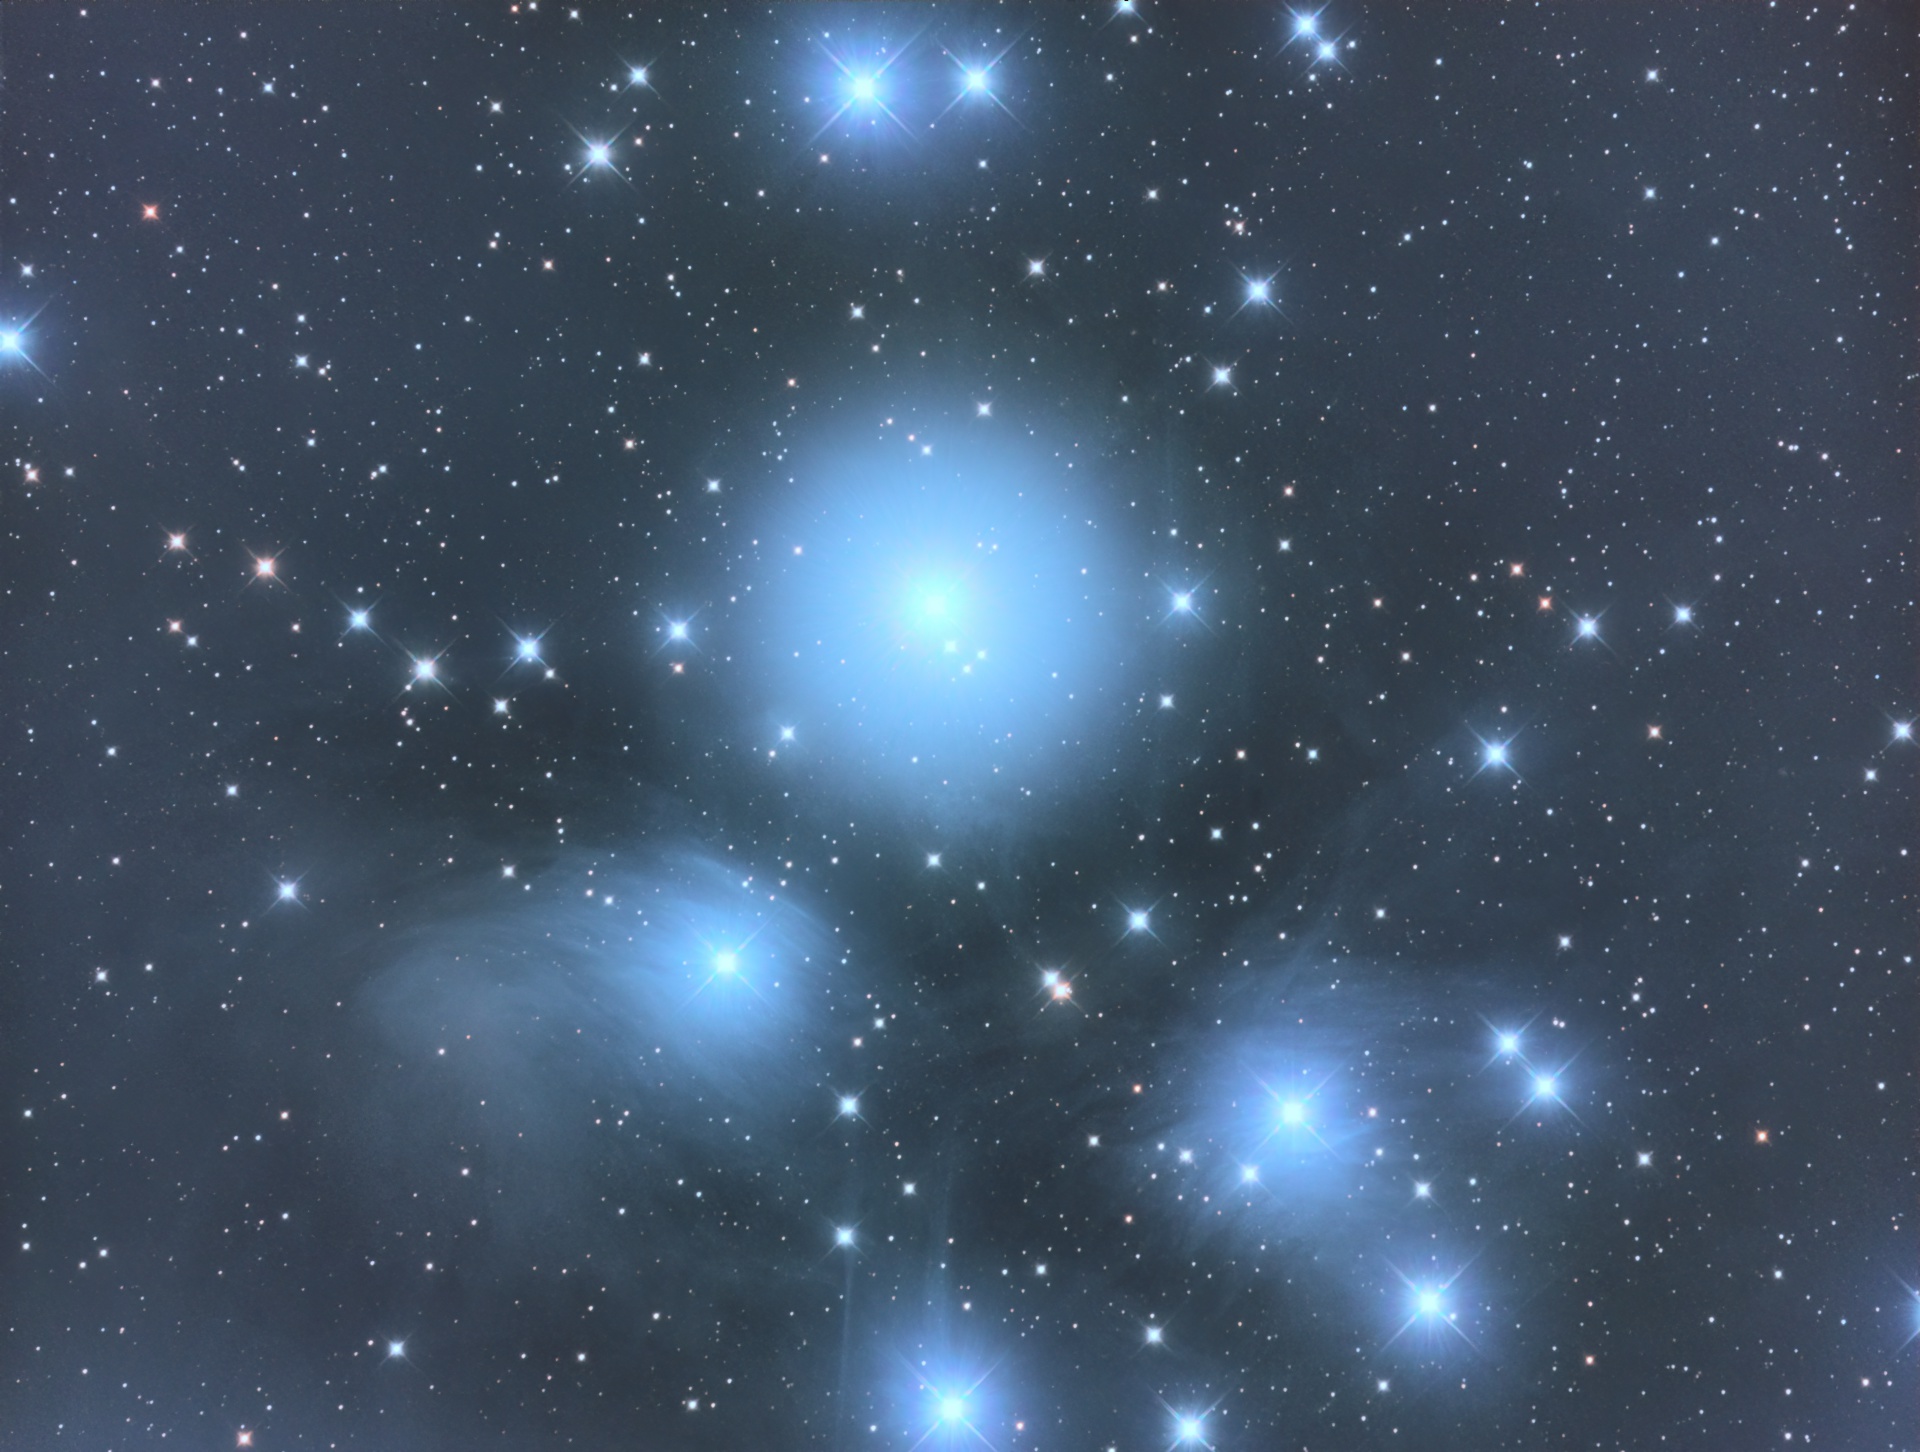 M45 - Quick and Dirty